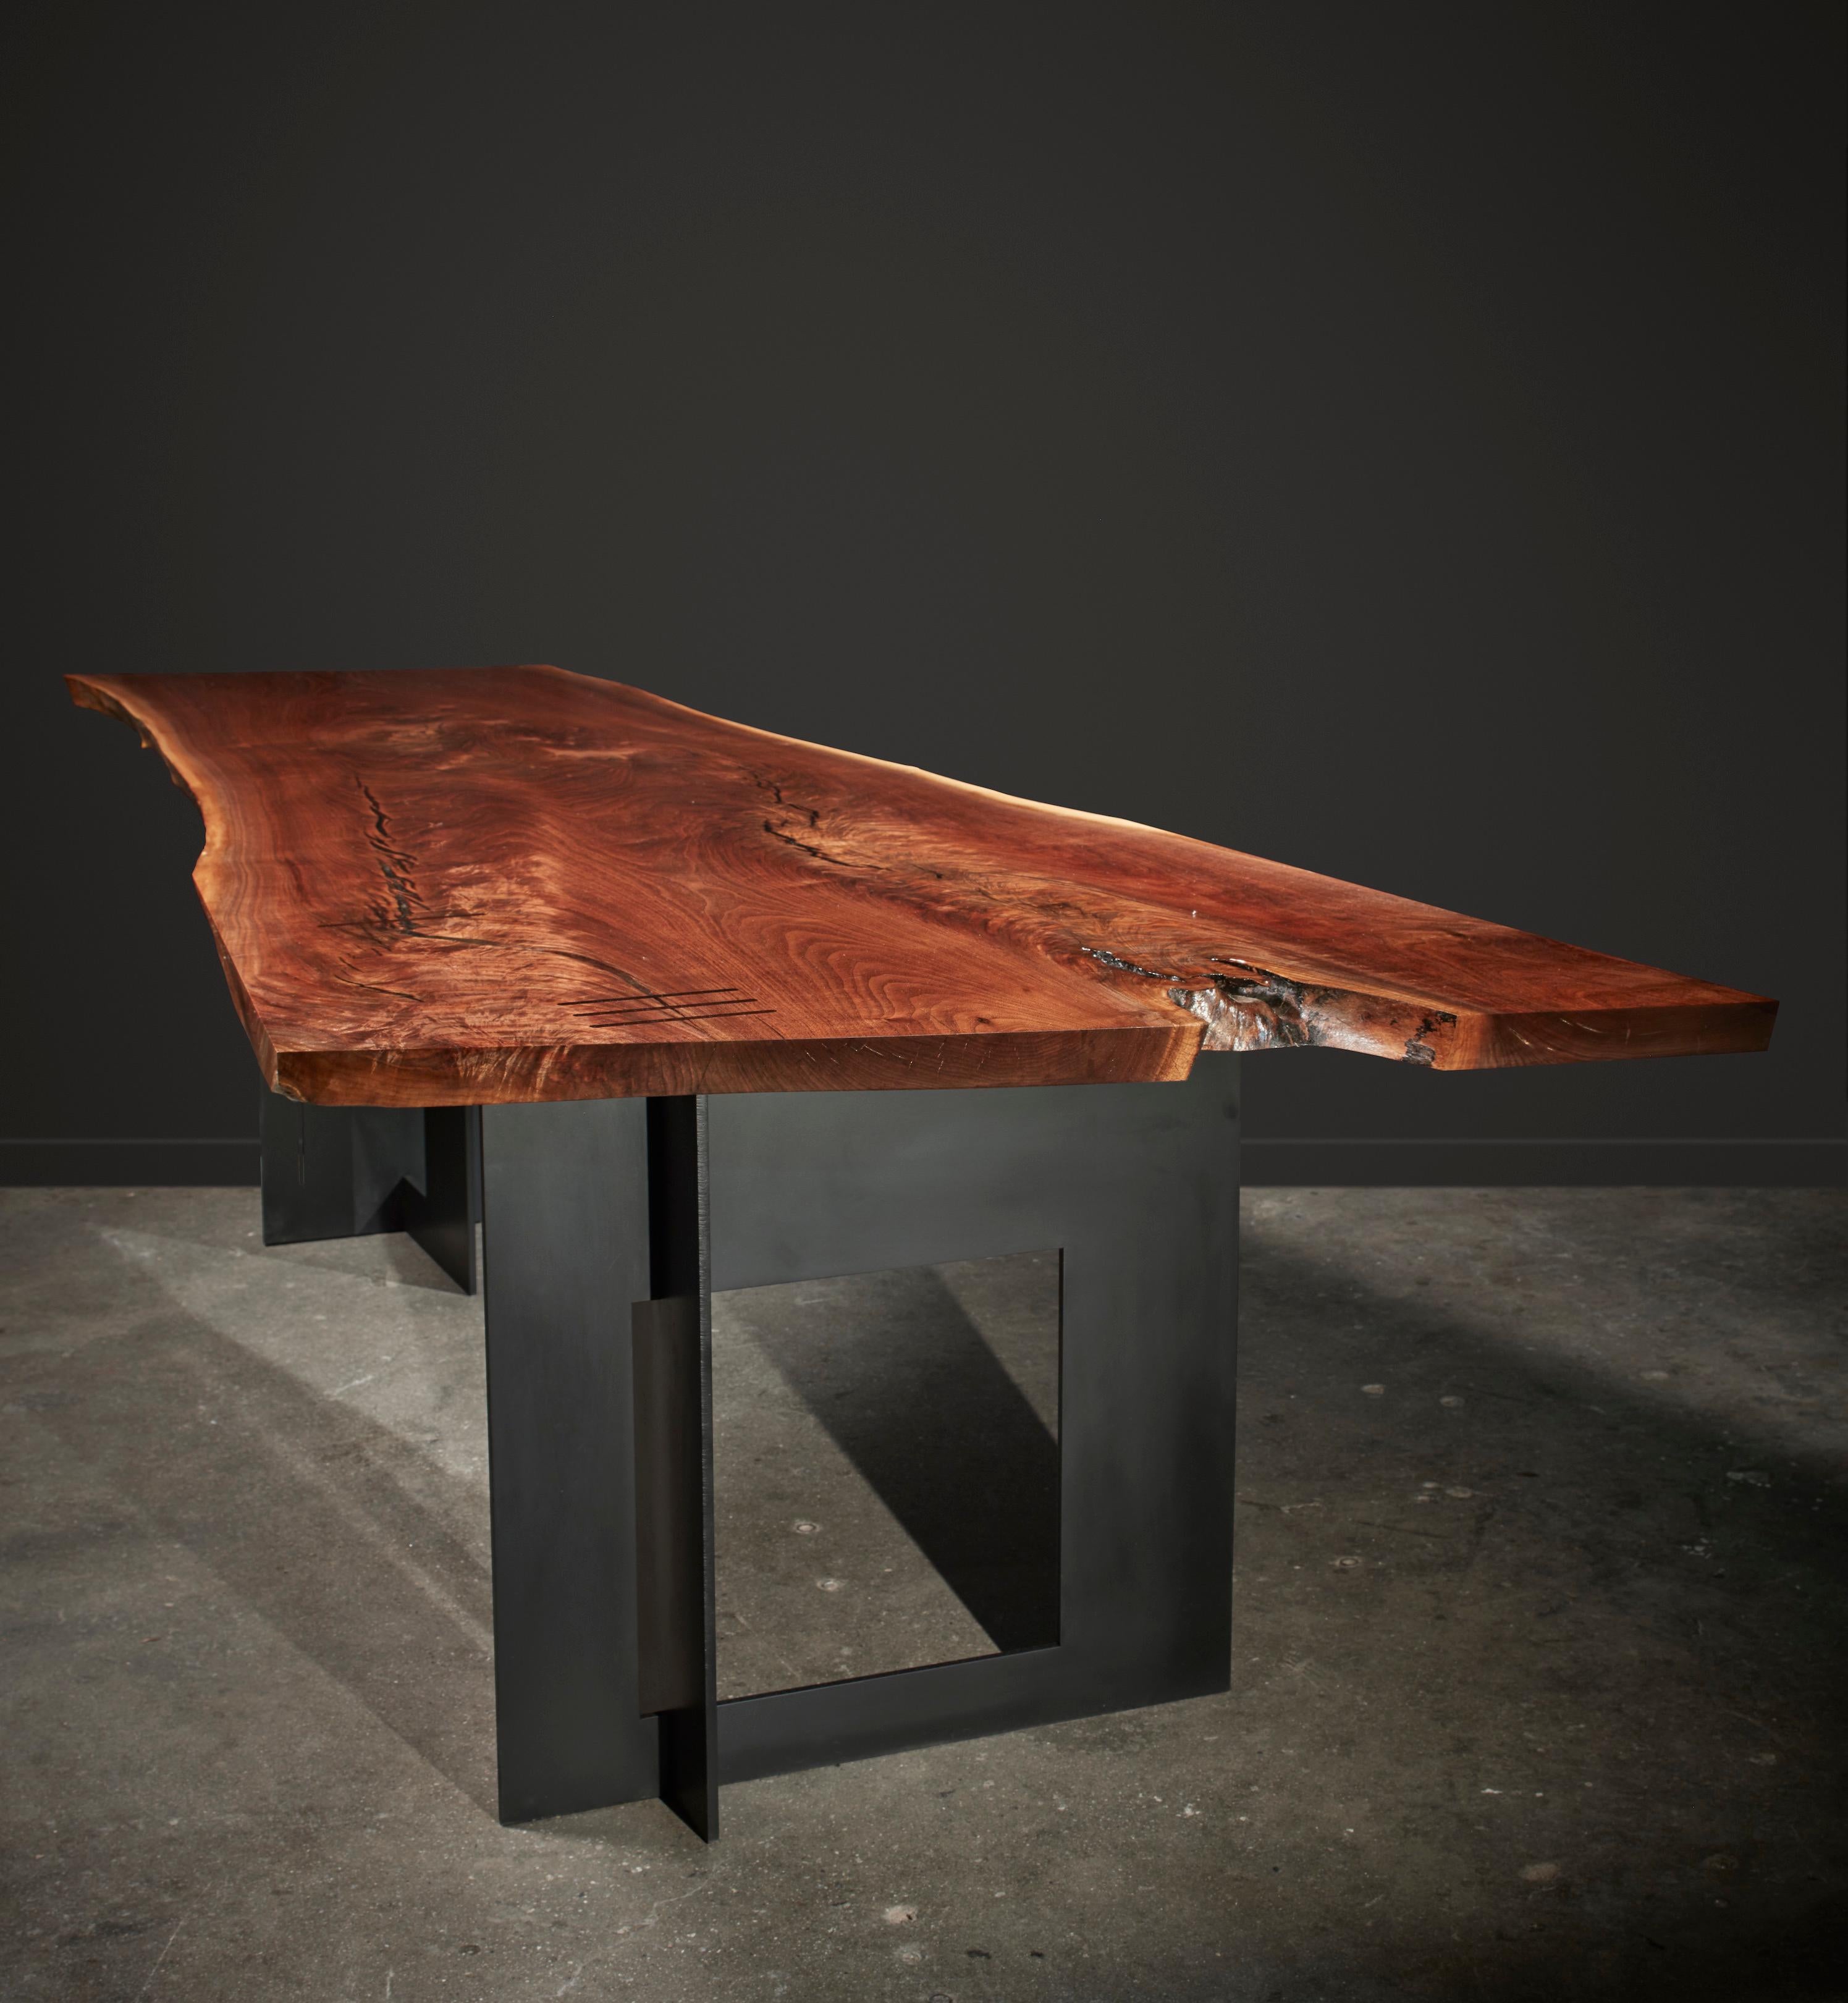 Manta dining table is conceived, designed and created by award-winning artist and architectural designer Michael Olshefski of Primal Modern. Inspired by the flight of the Manta at sea, this beautiful dining table is crafted from a single piece of